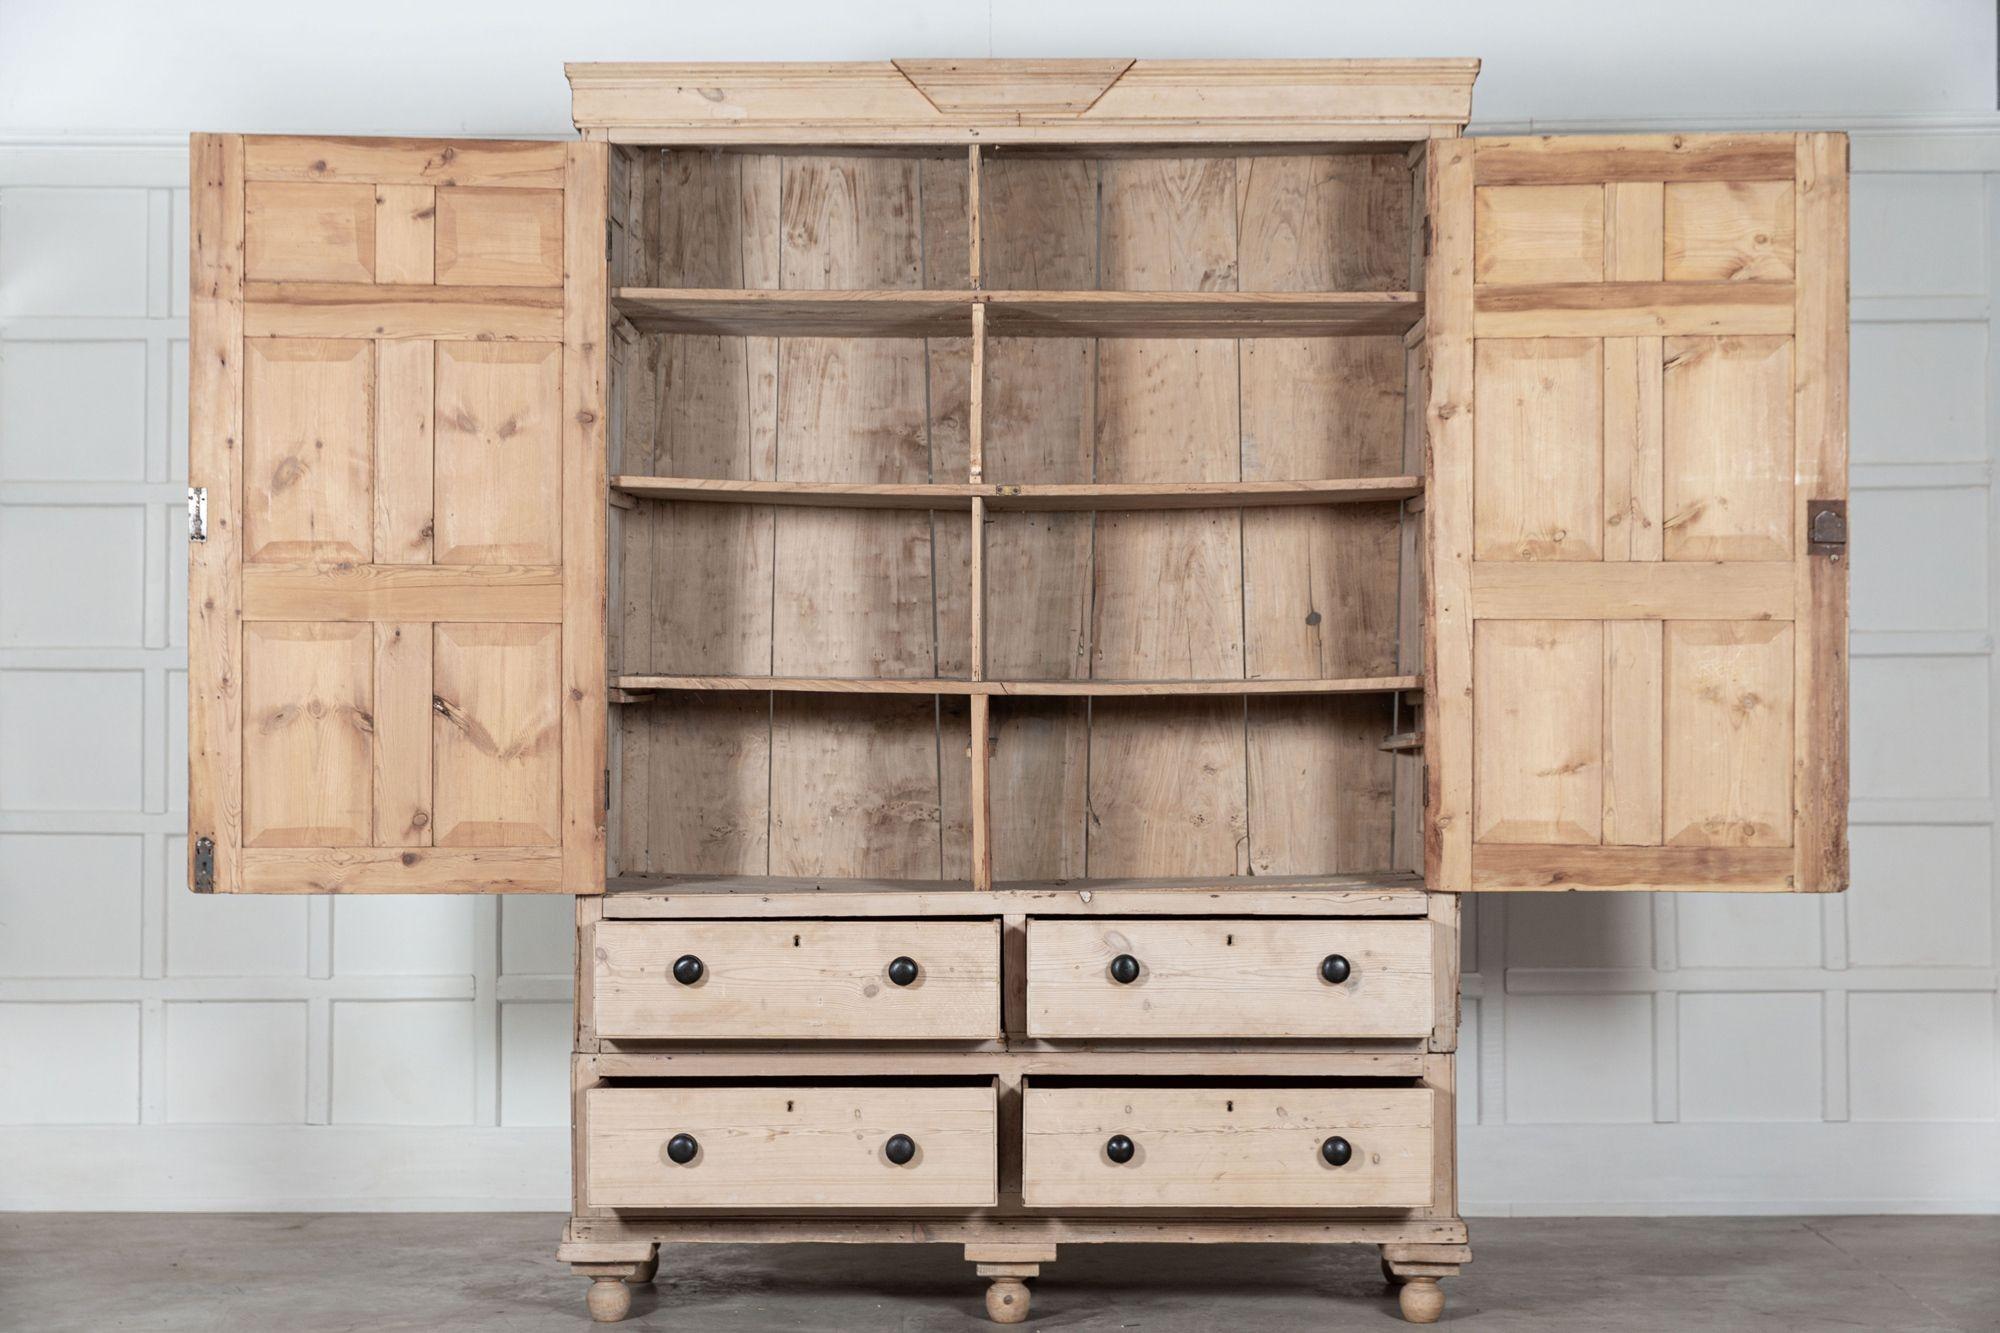 circa 1850
Monumental 19thC English Pine Housekeepers Cupboard
sku 1349
We can also customise existing pieces to suit your scheme/requirements. We have our own workshop, restorers and finishers. From adapting to finishing pieces including,